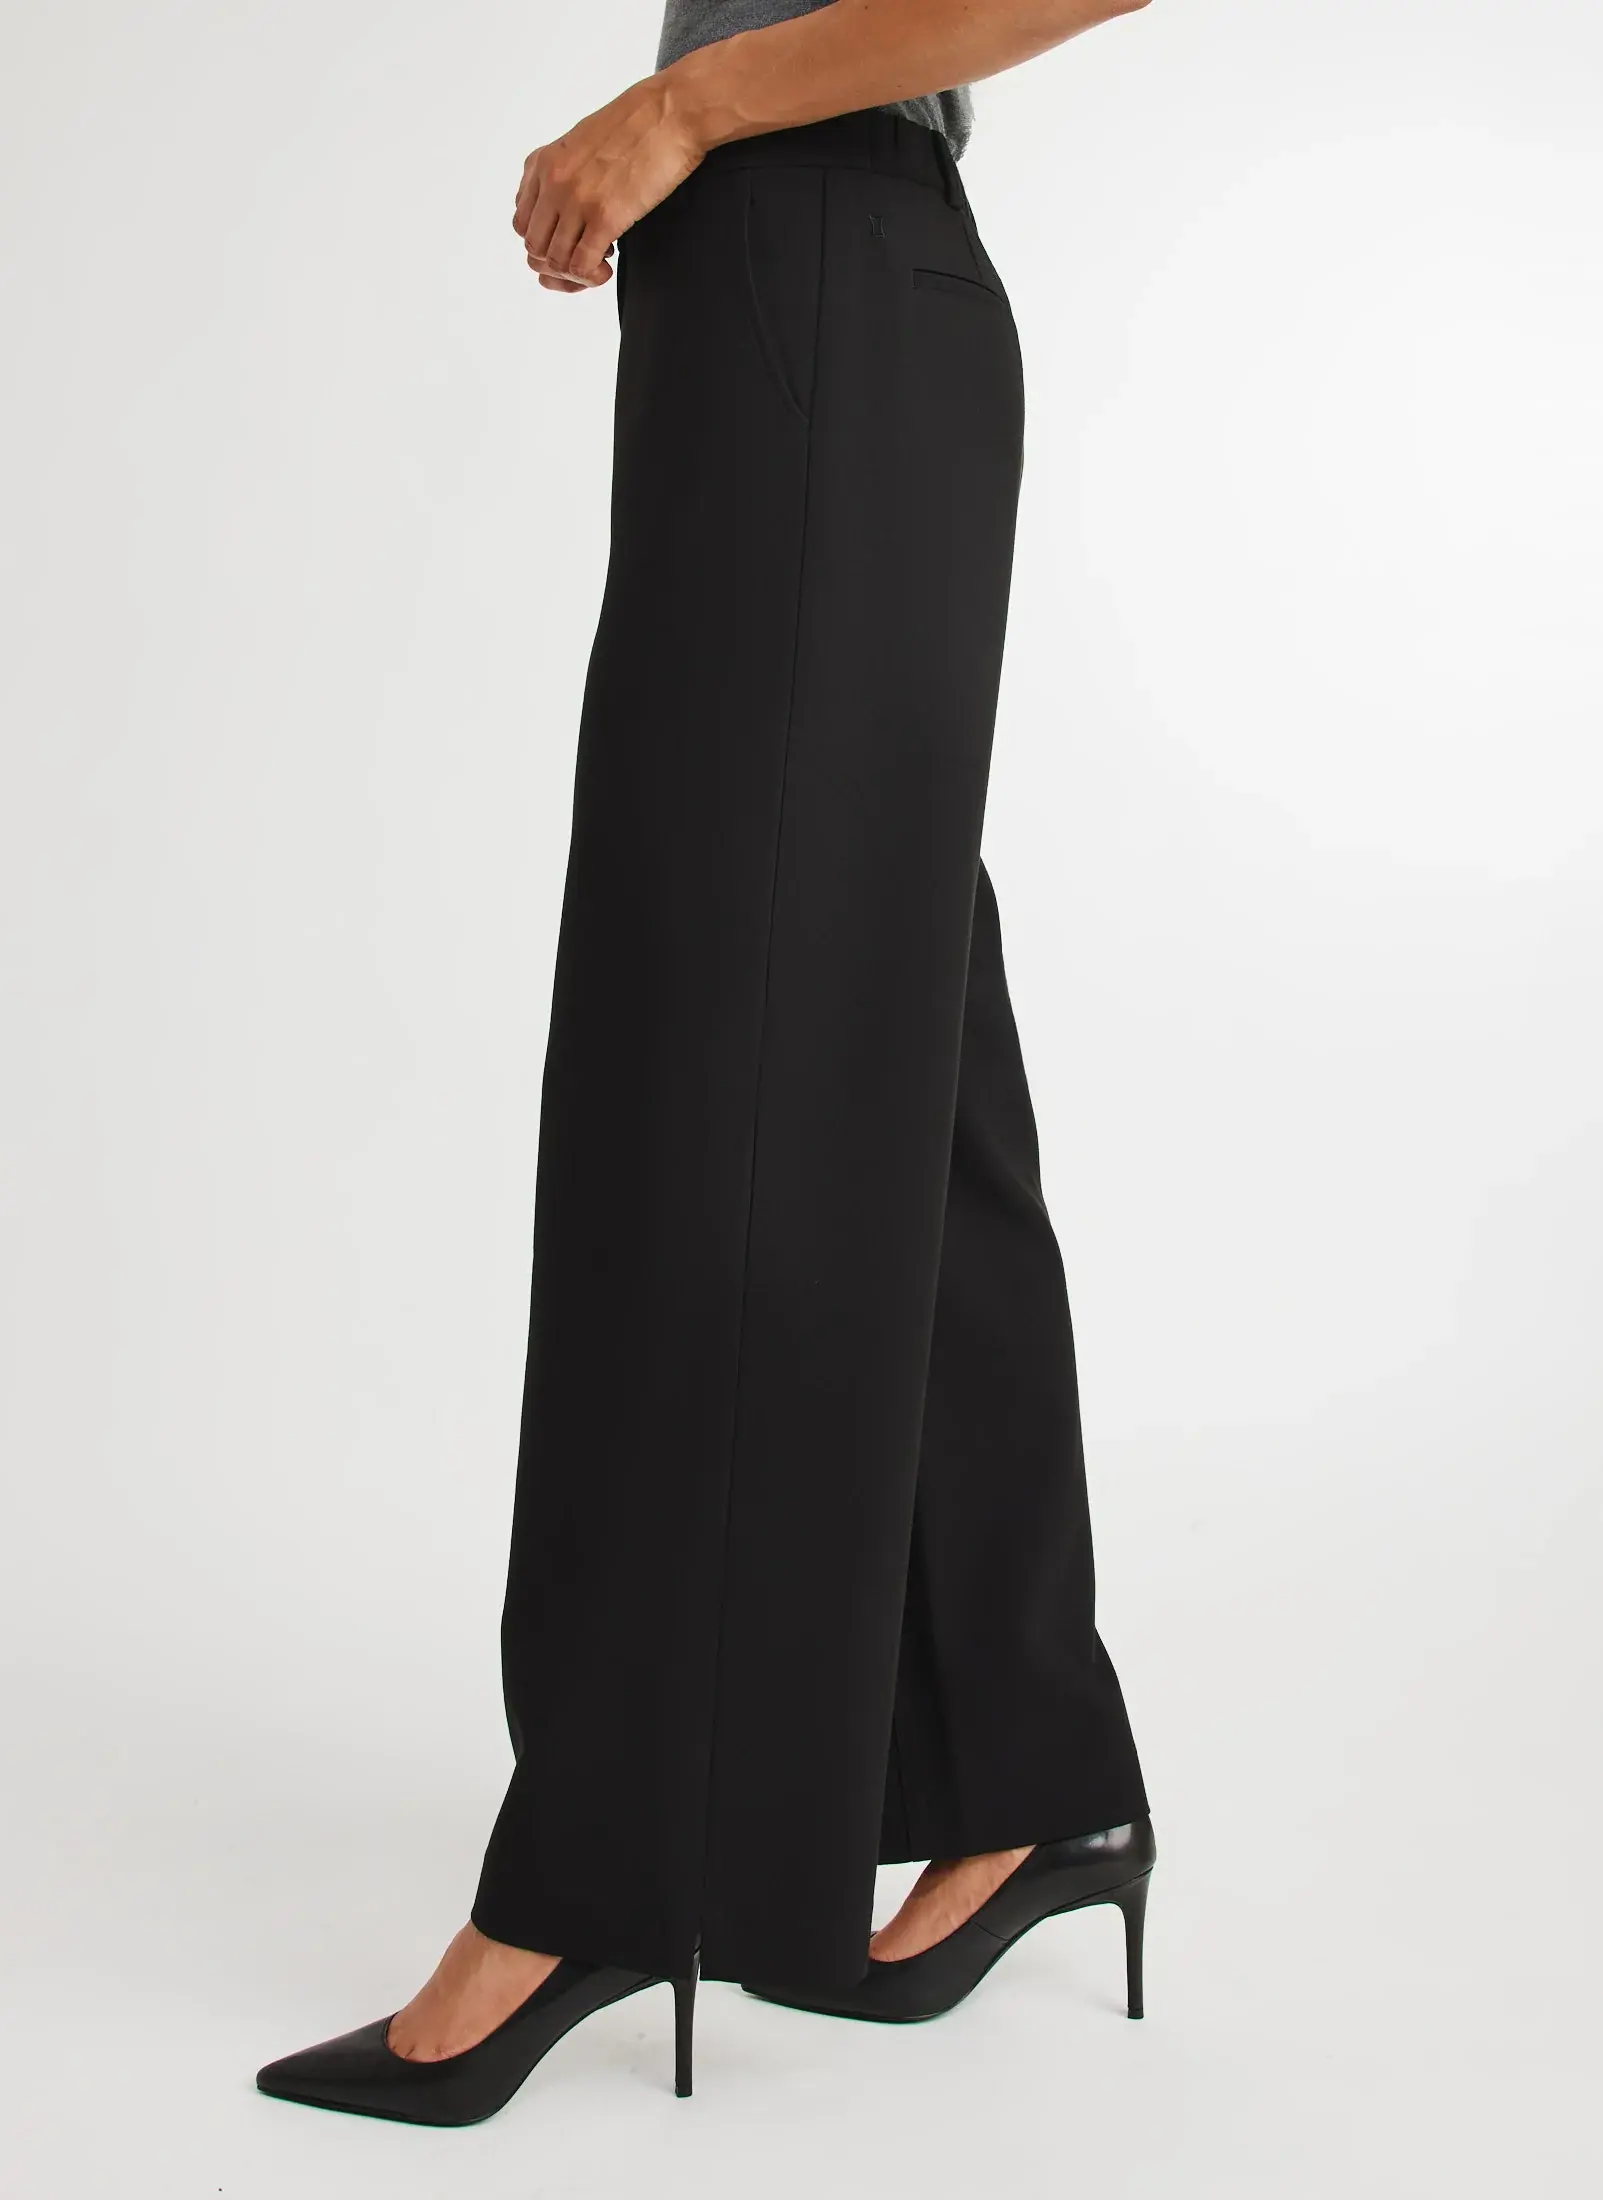 Kit And Ace Adelaide Wide Leg Pants. 1